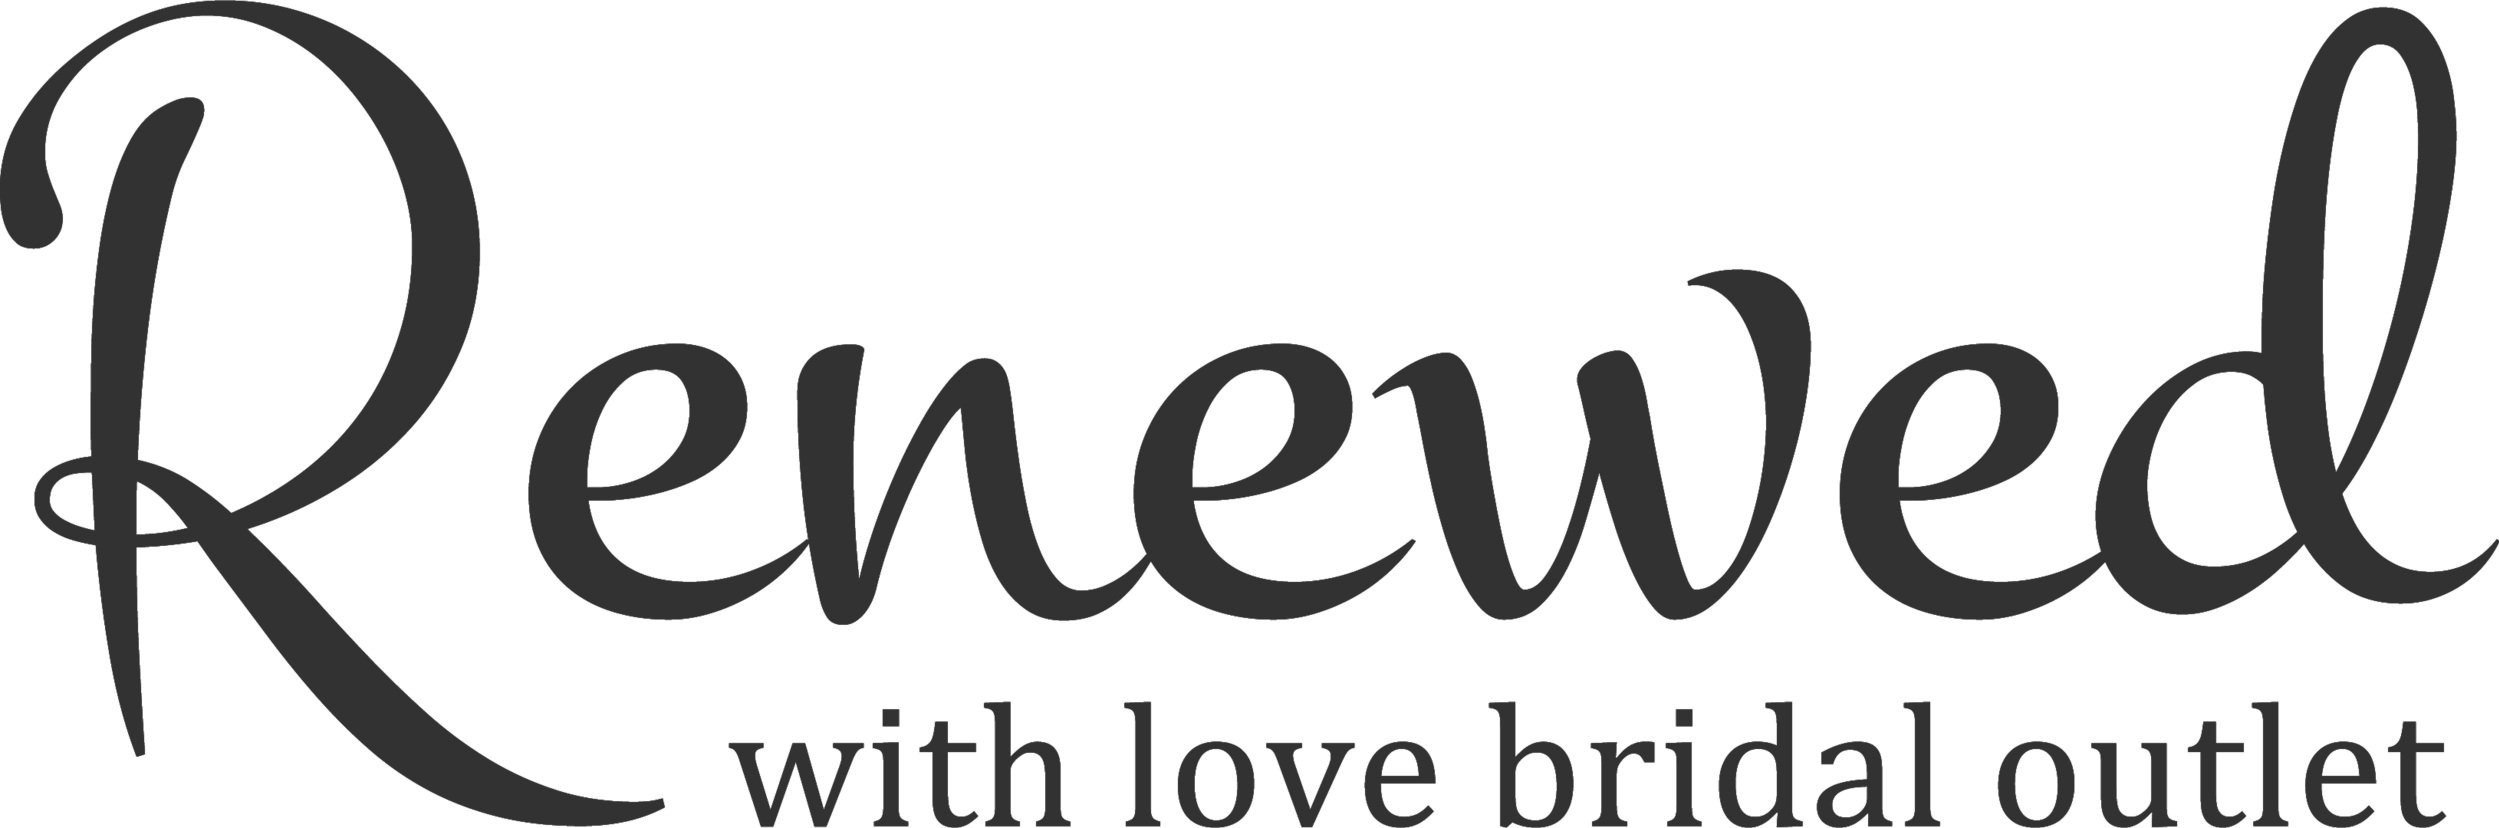 Renewed With Love Bridal Outlet